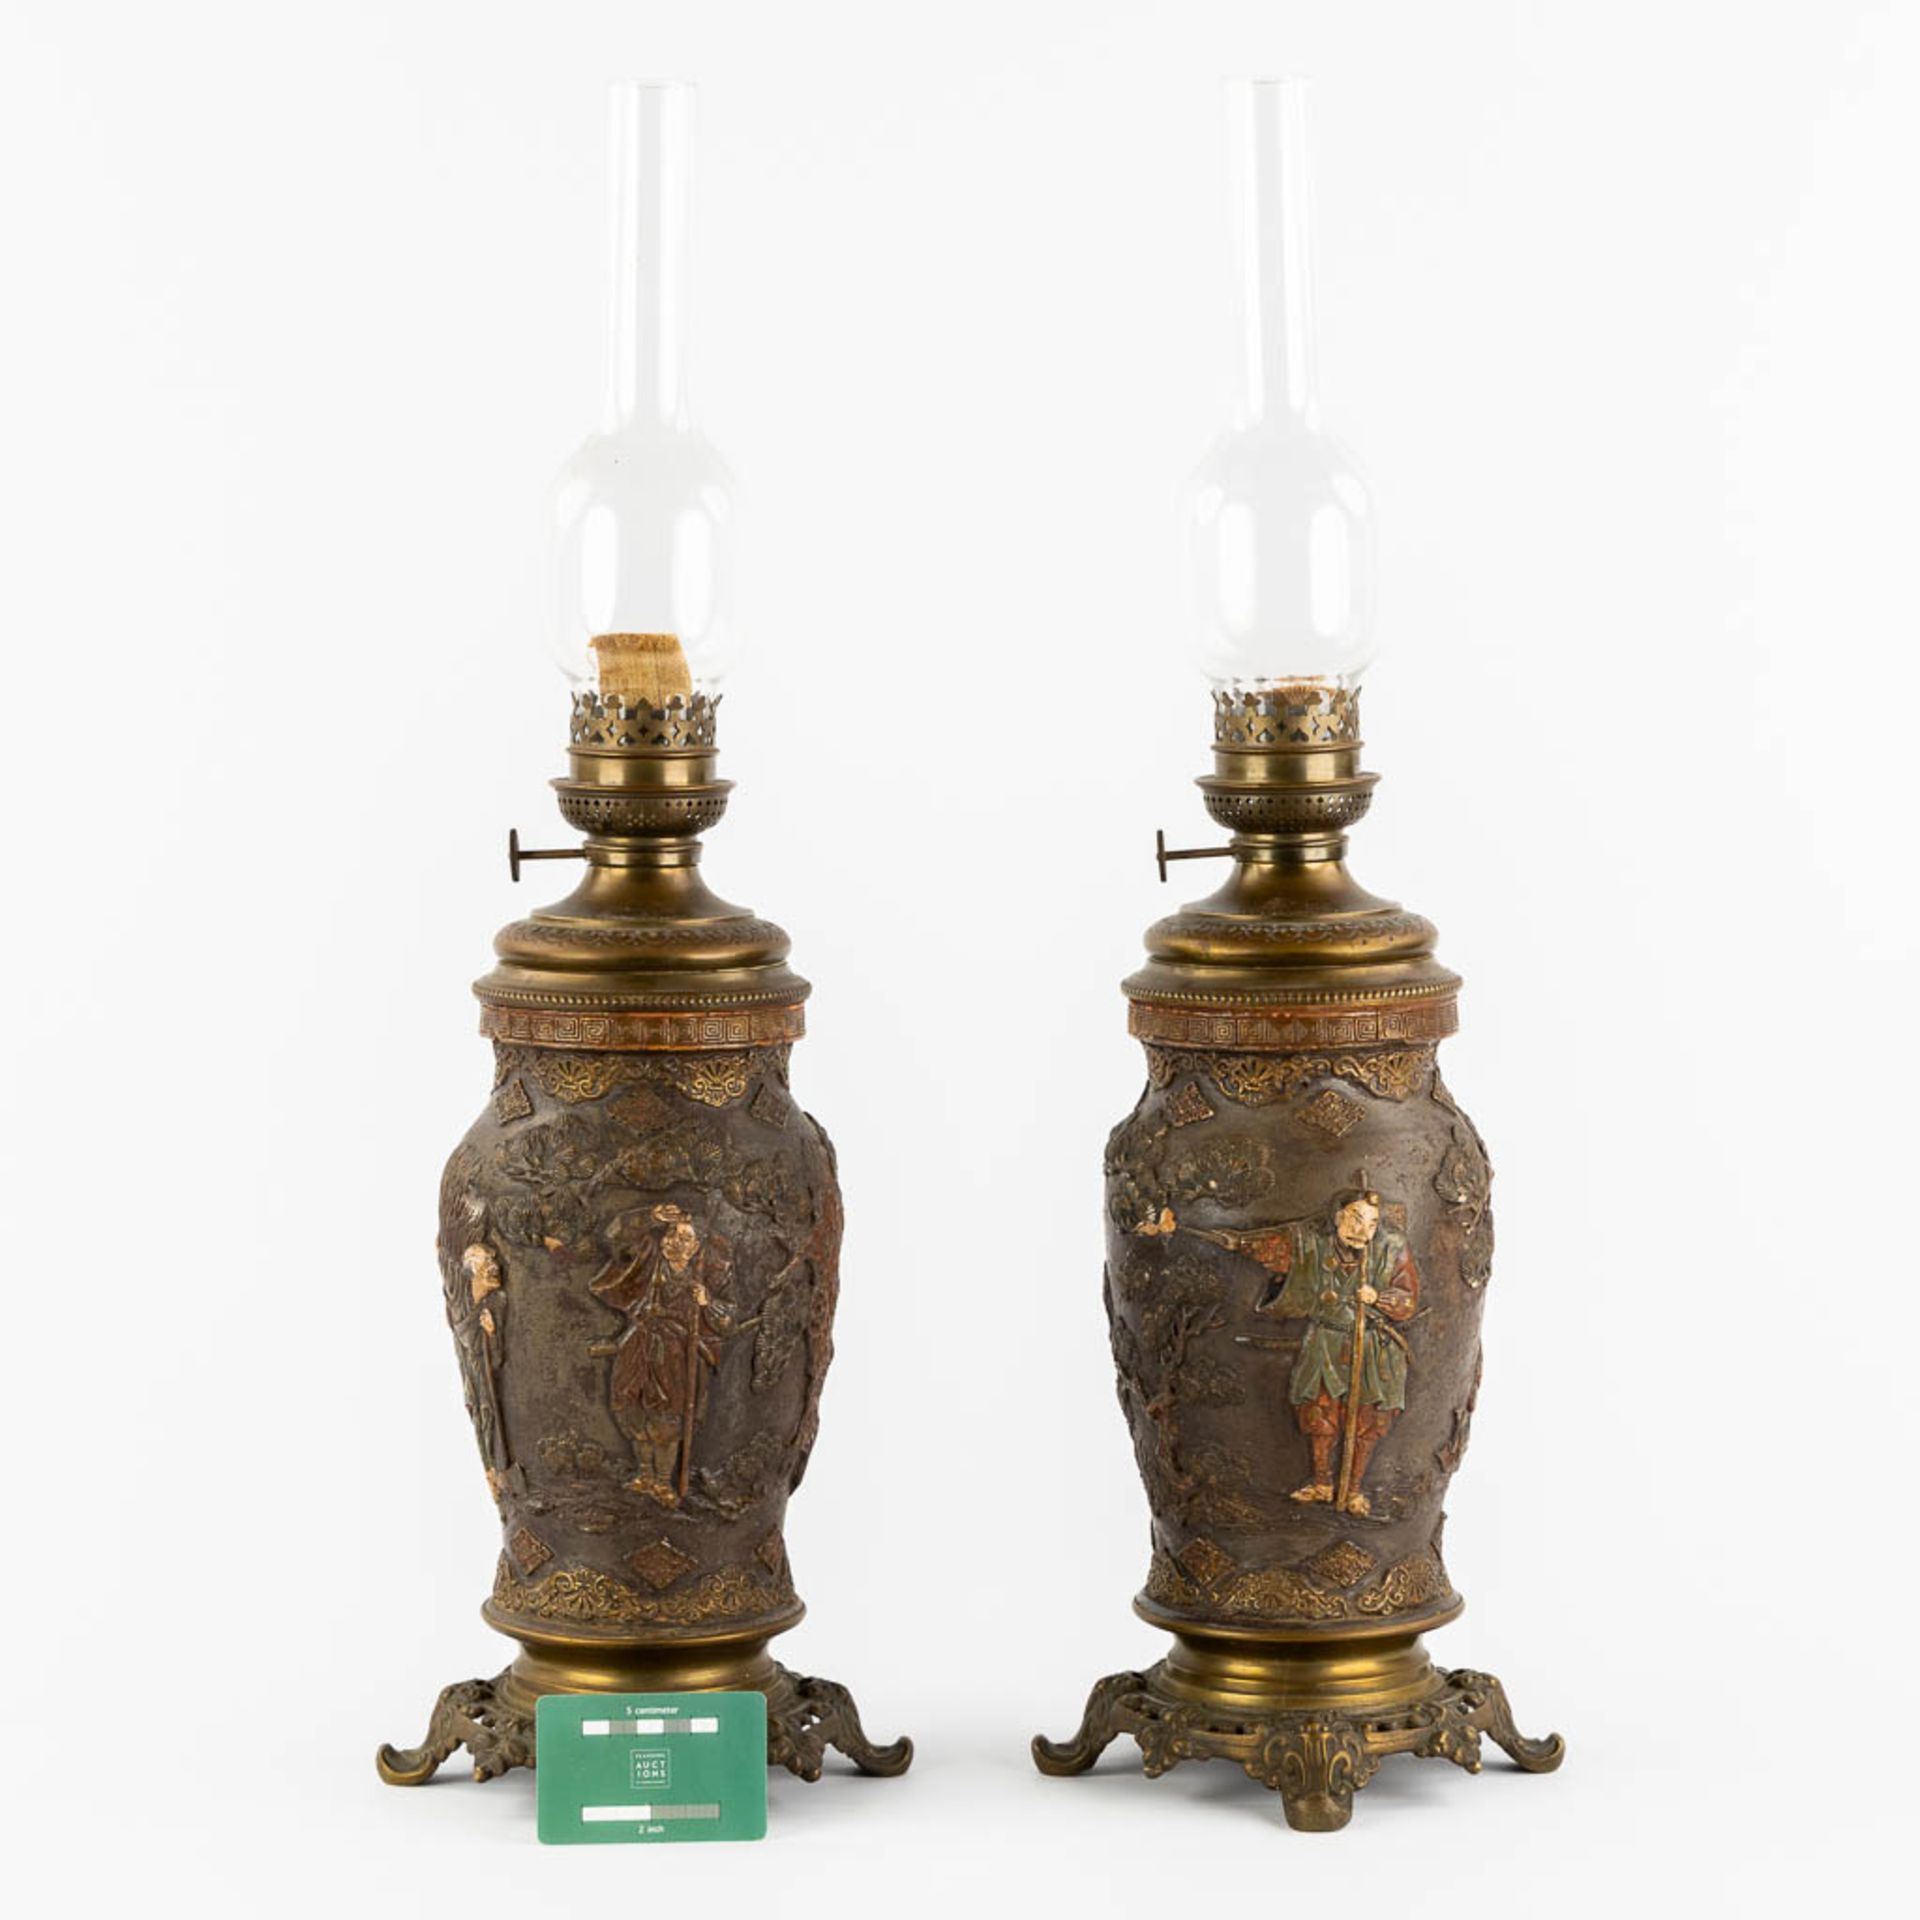 An Oriental pair of oil lamps, terracotta mounted with bronze. Circa 1900. (H:66 x D:18 cm) - Image 2 of 17